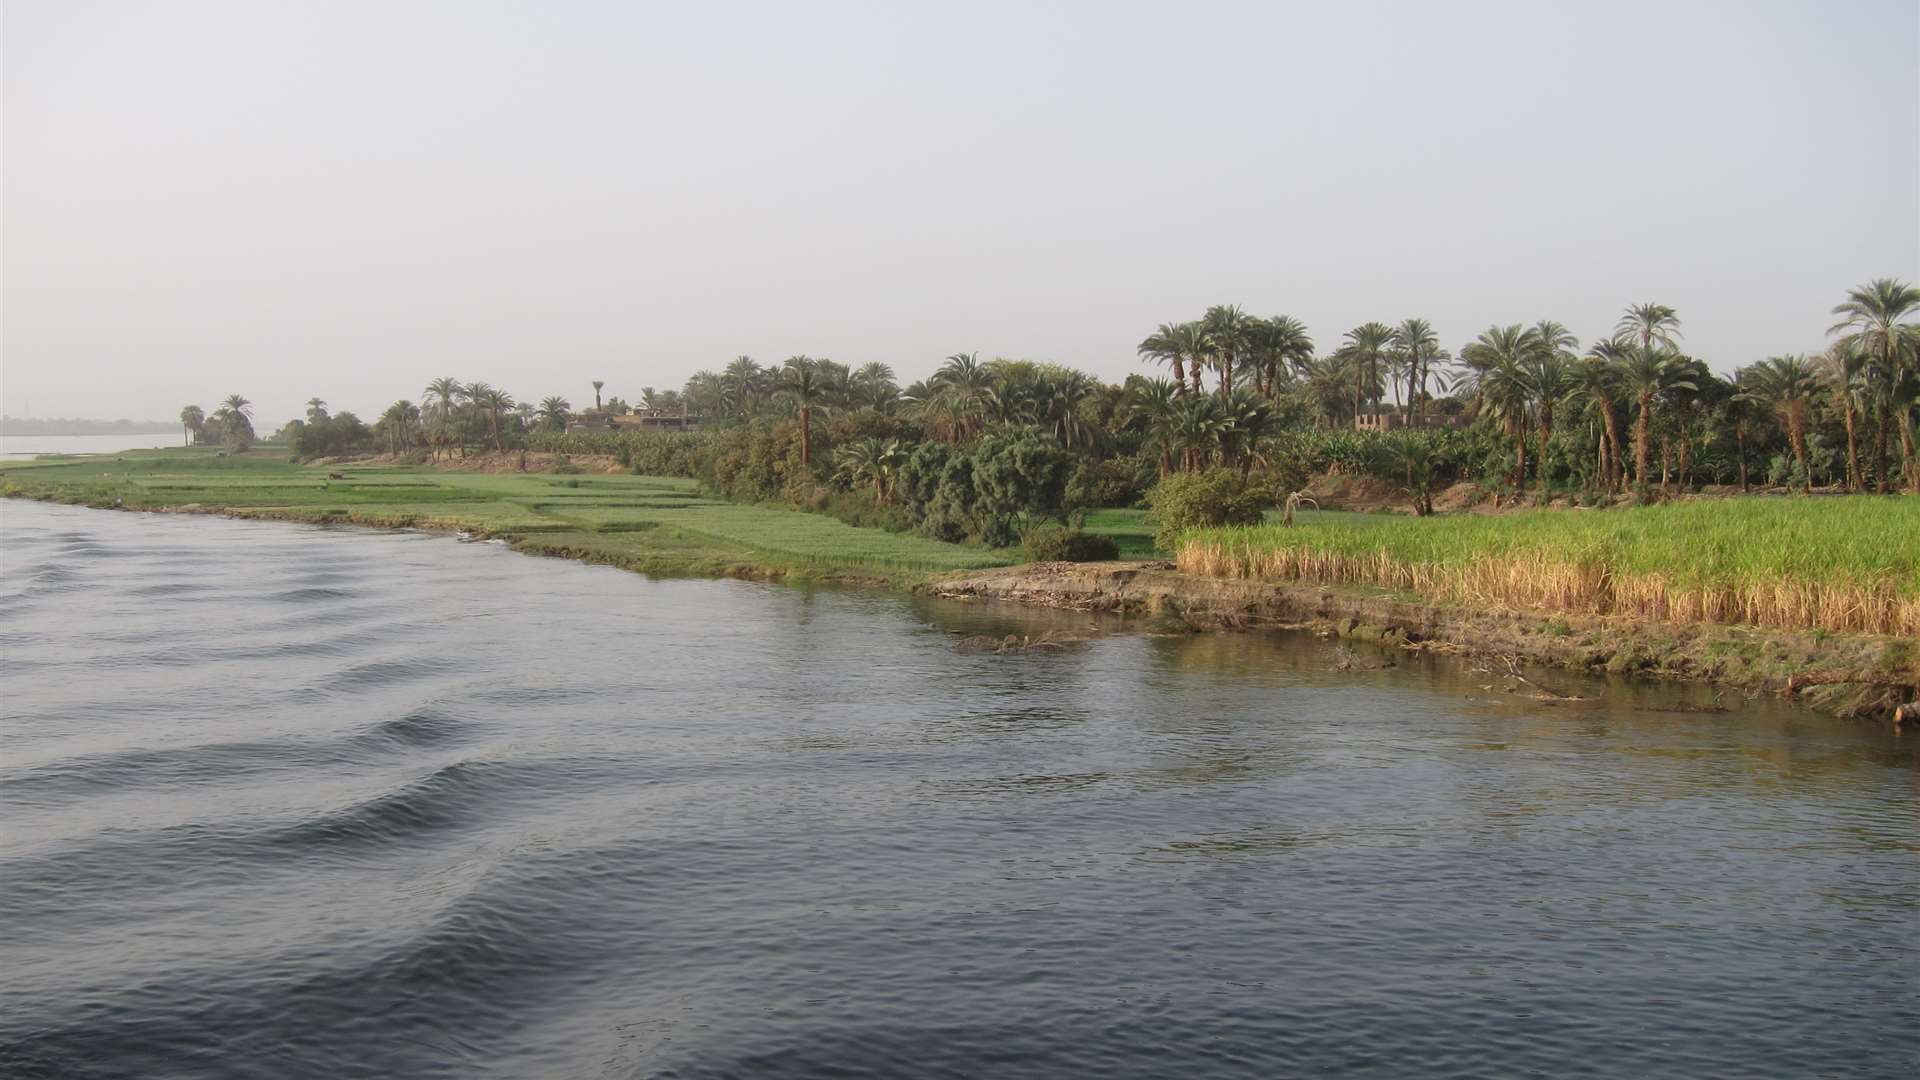 The banks of the Nile